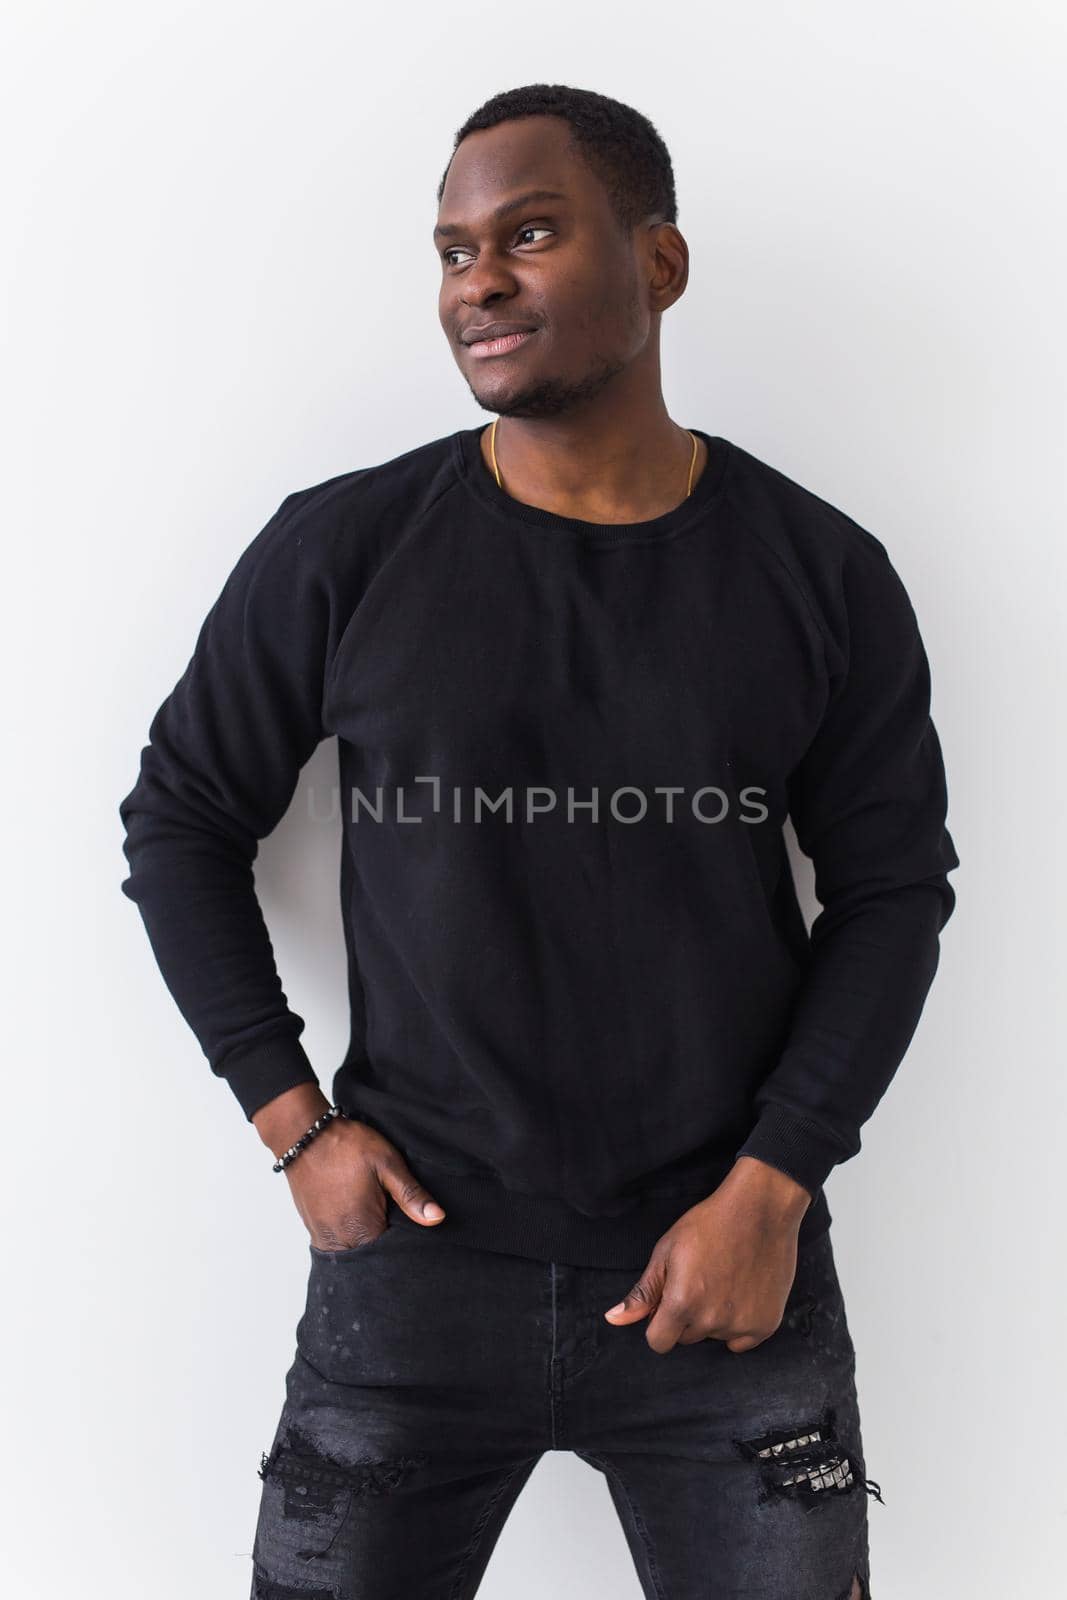 Handsome African American man posing in black sweatshirt on a white background. Youth street fashion photo with afro hairstyle. by Satura86